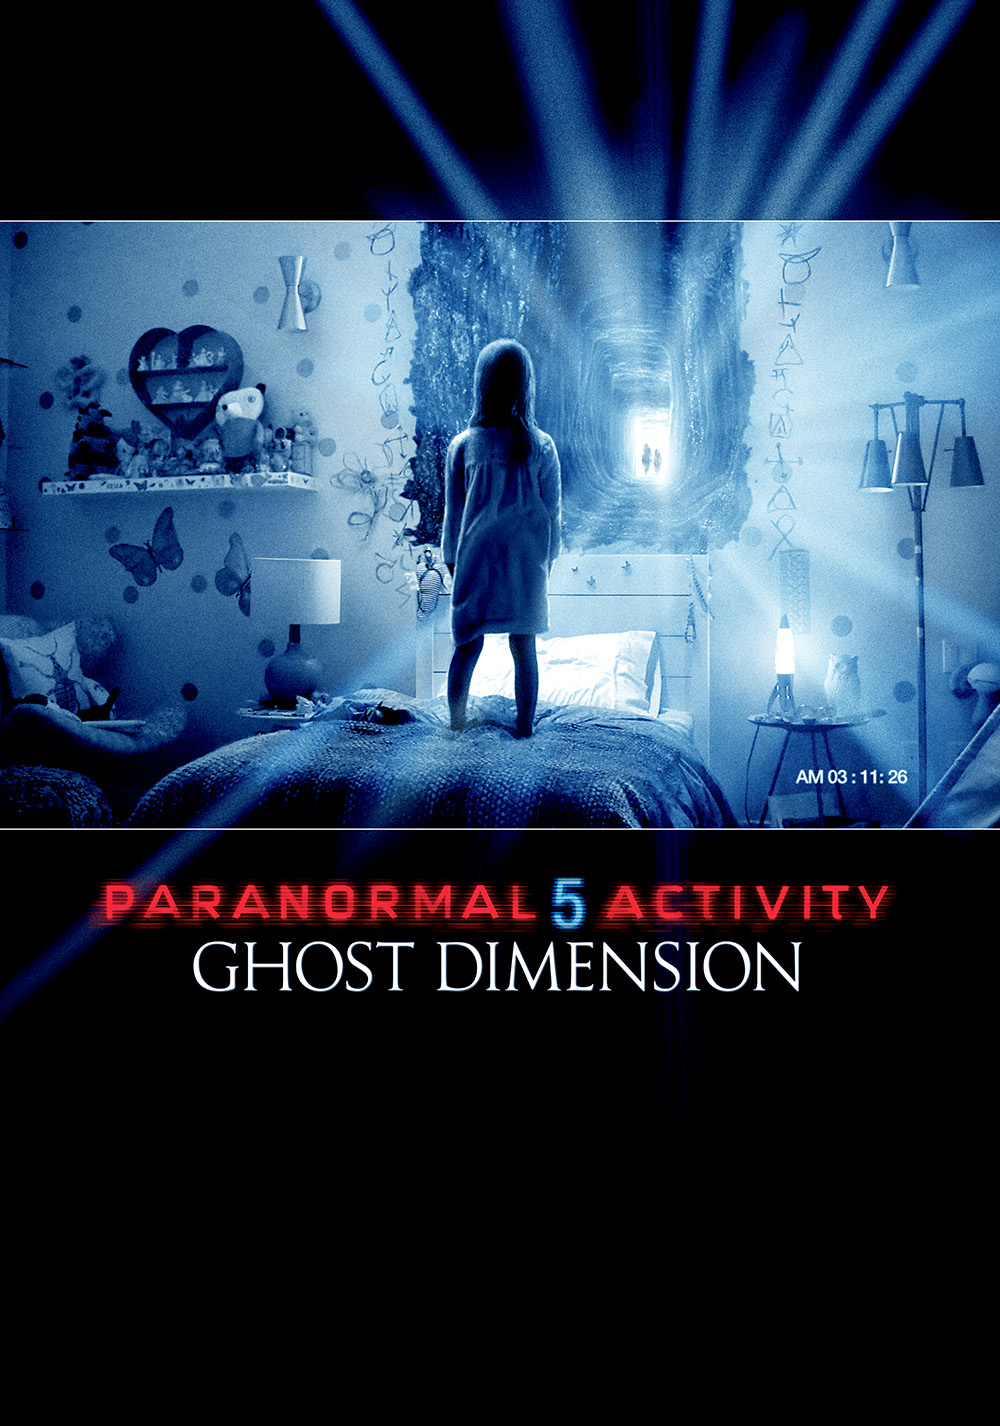 Paranormal Activity: The ghost dimension Picture